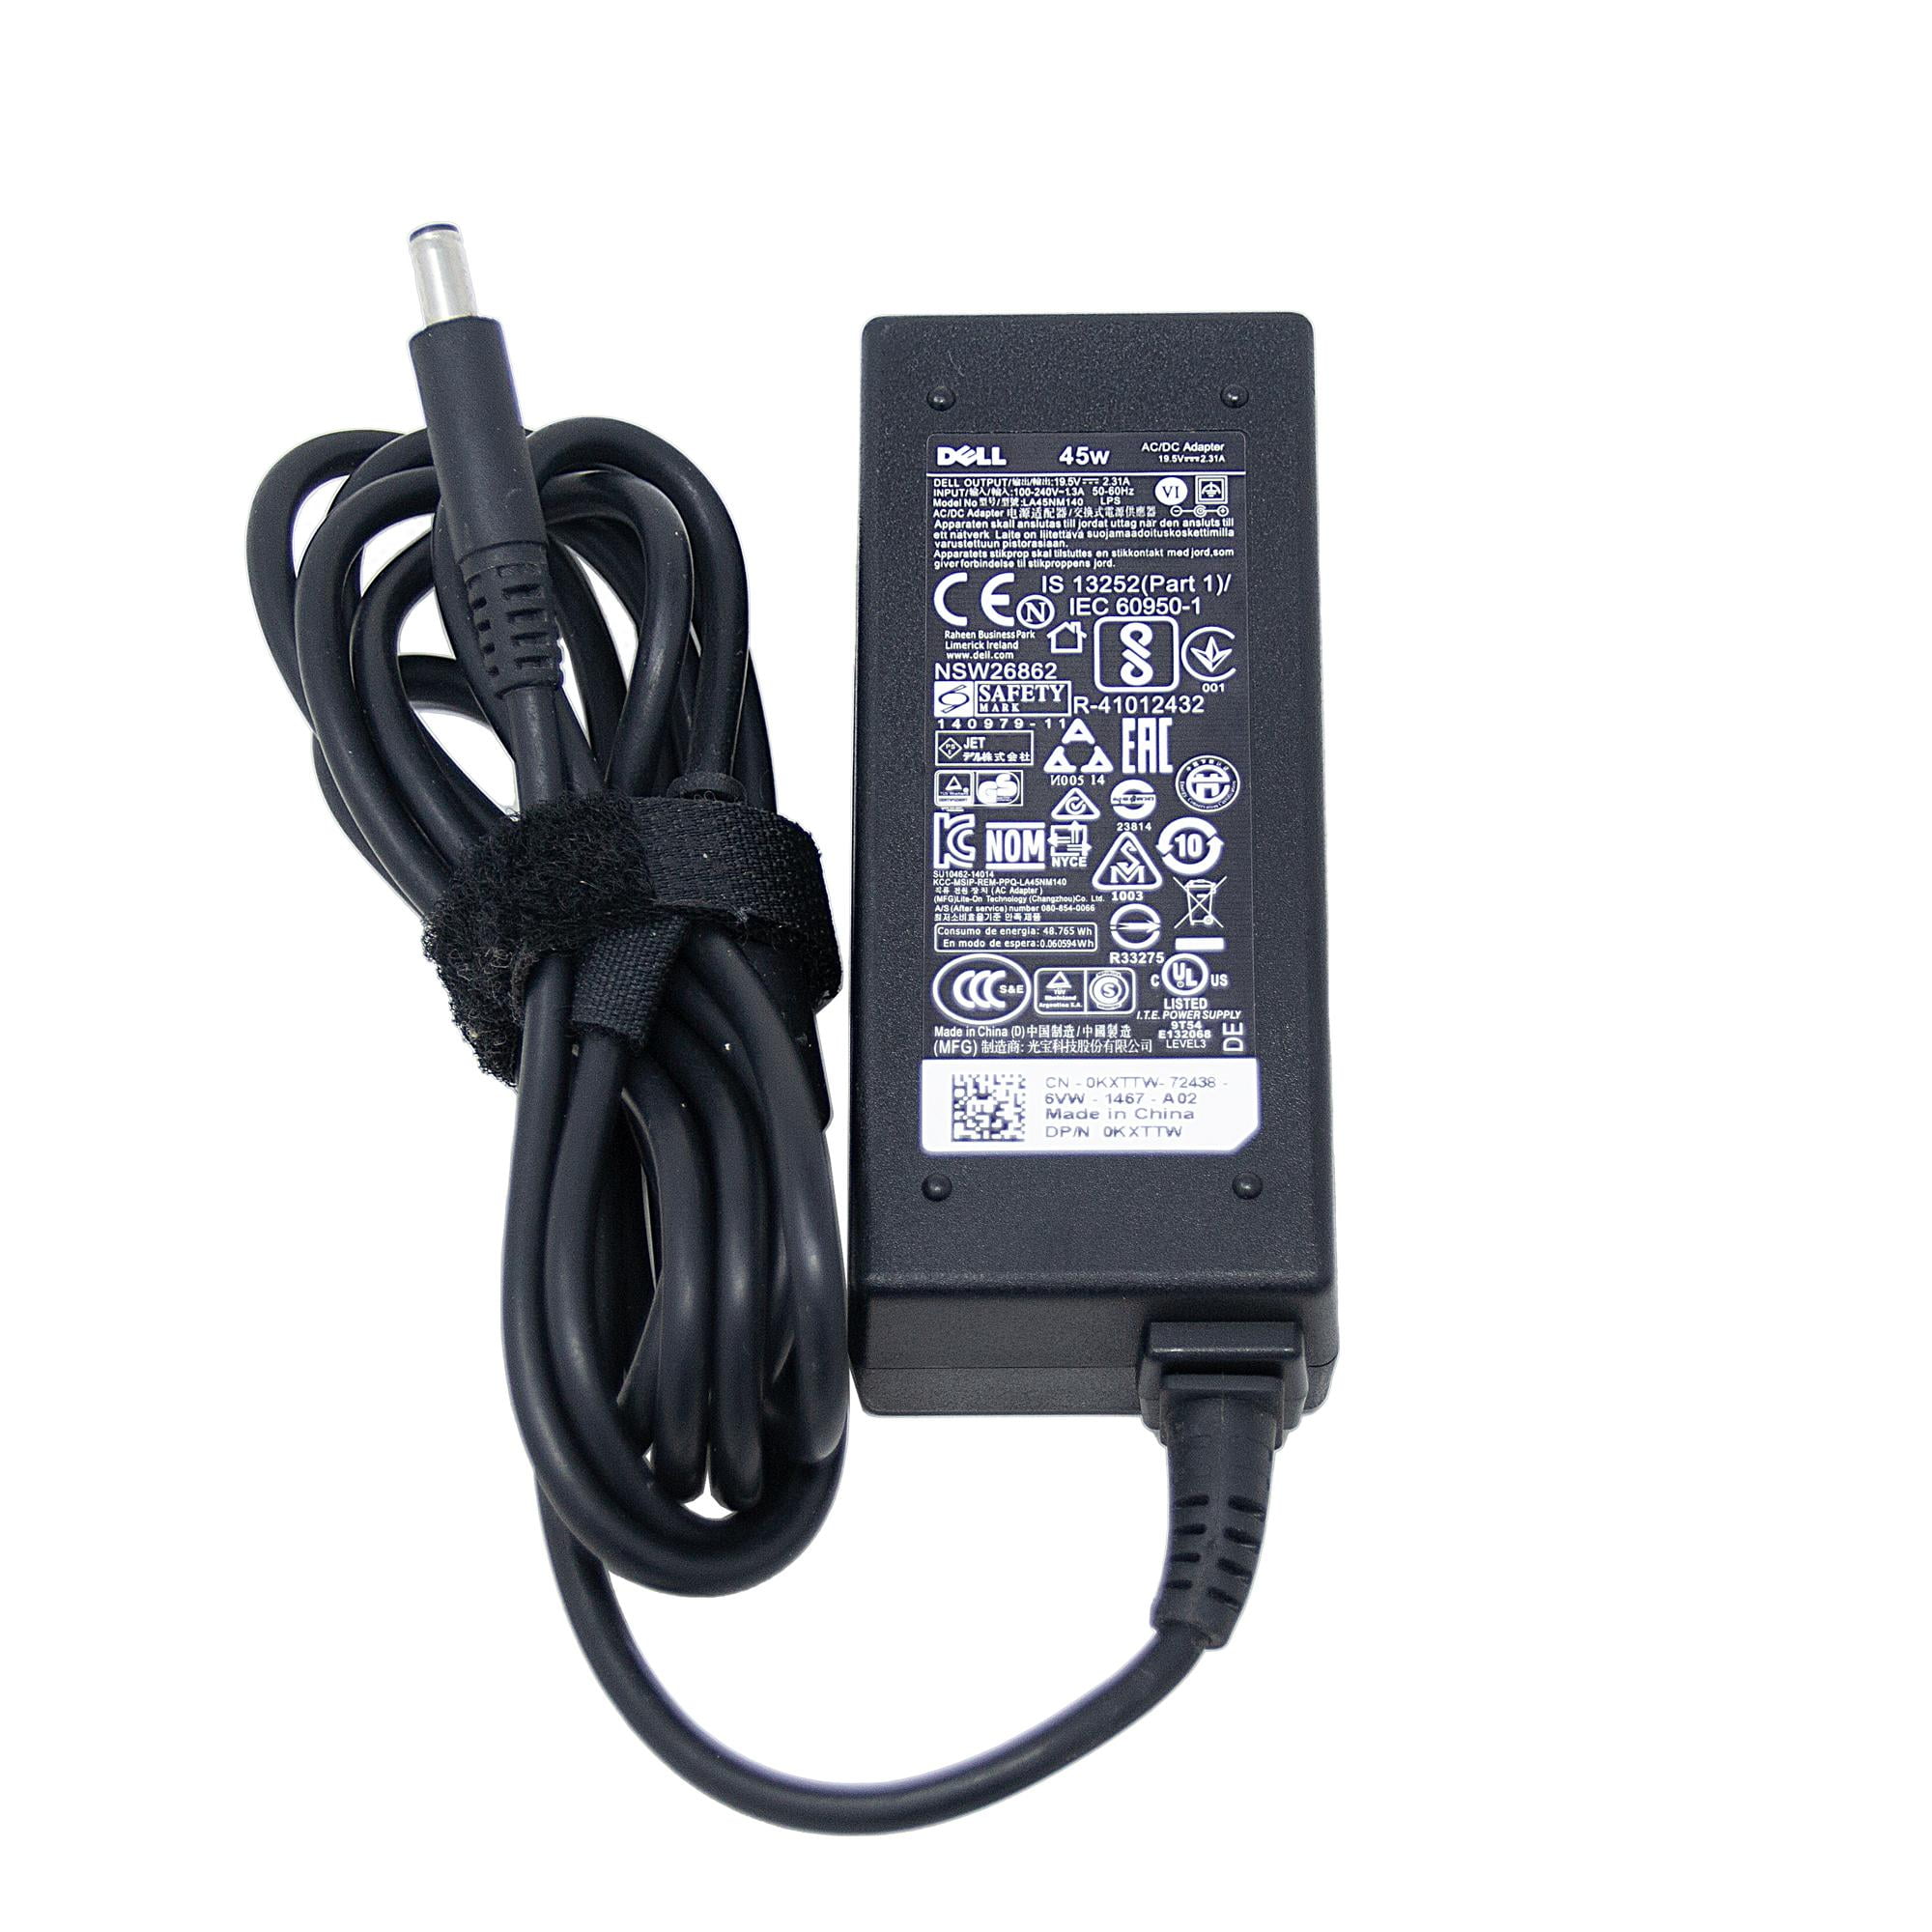 Dell Inspiron 7580 45W Laptop Charger AC Adapter - Walmart.com